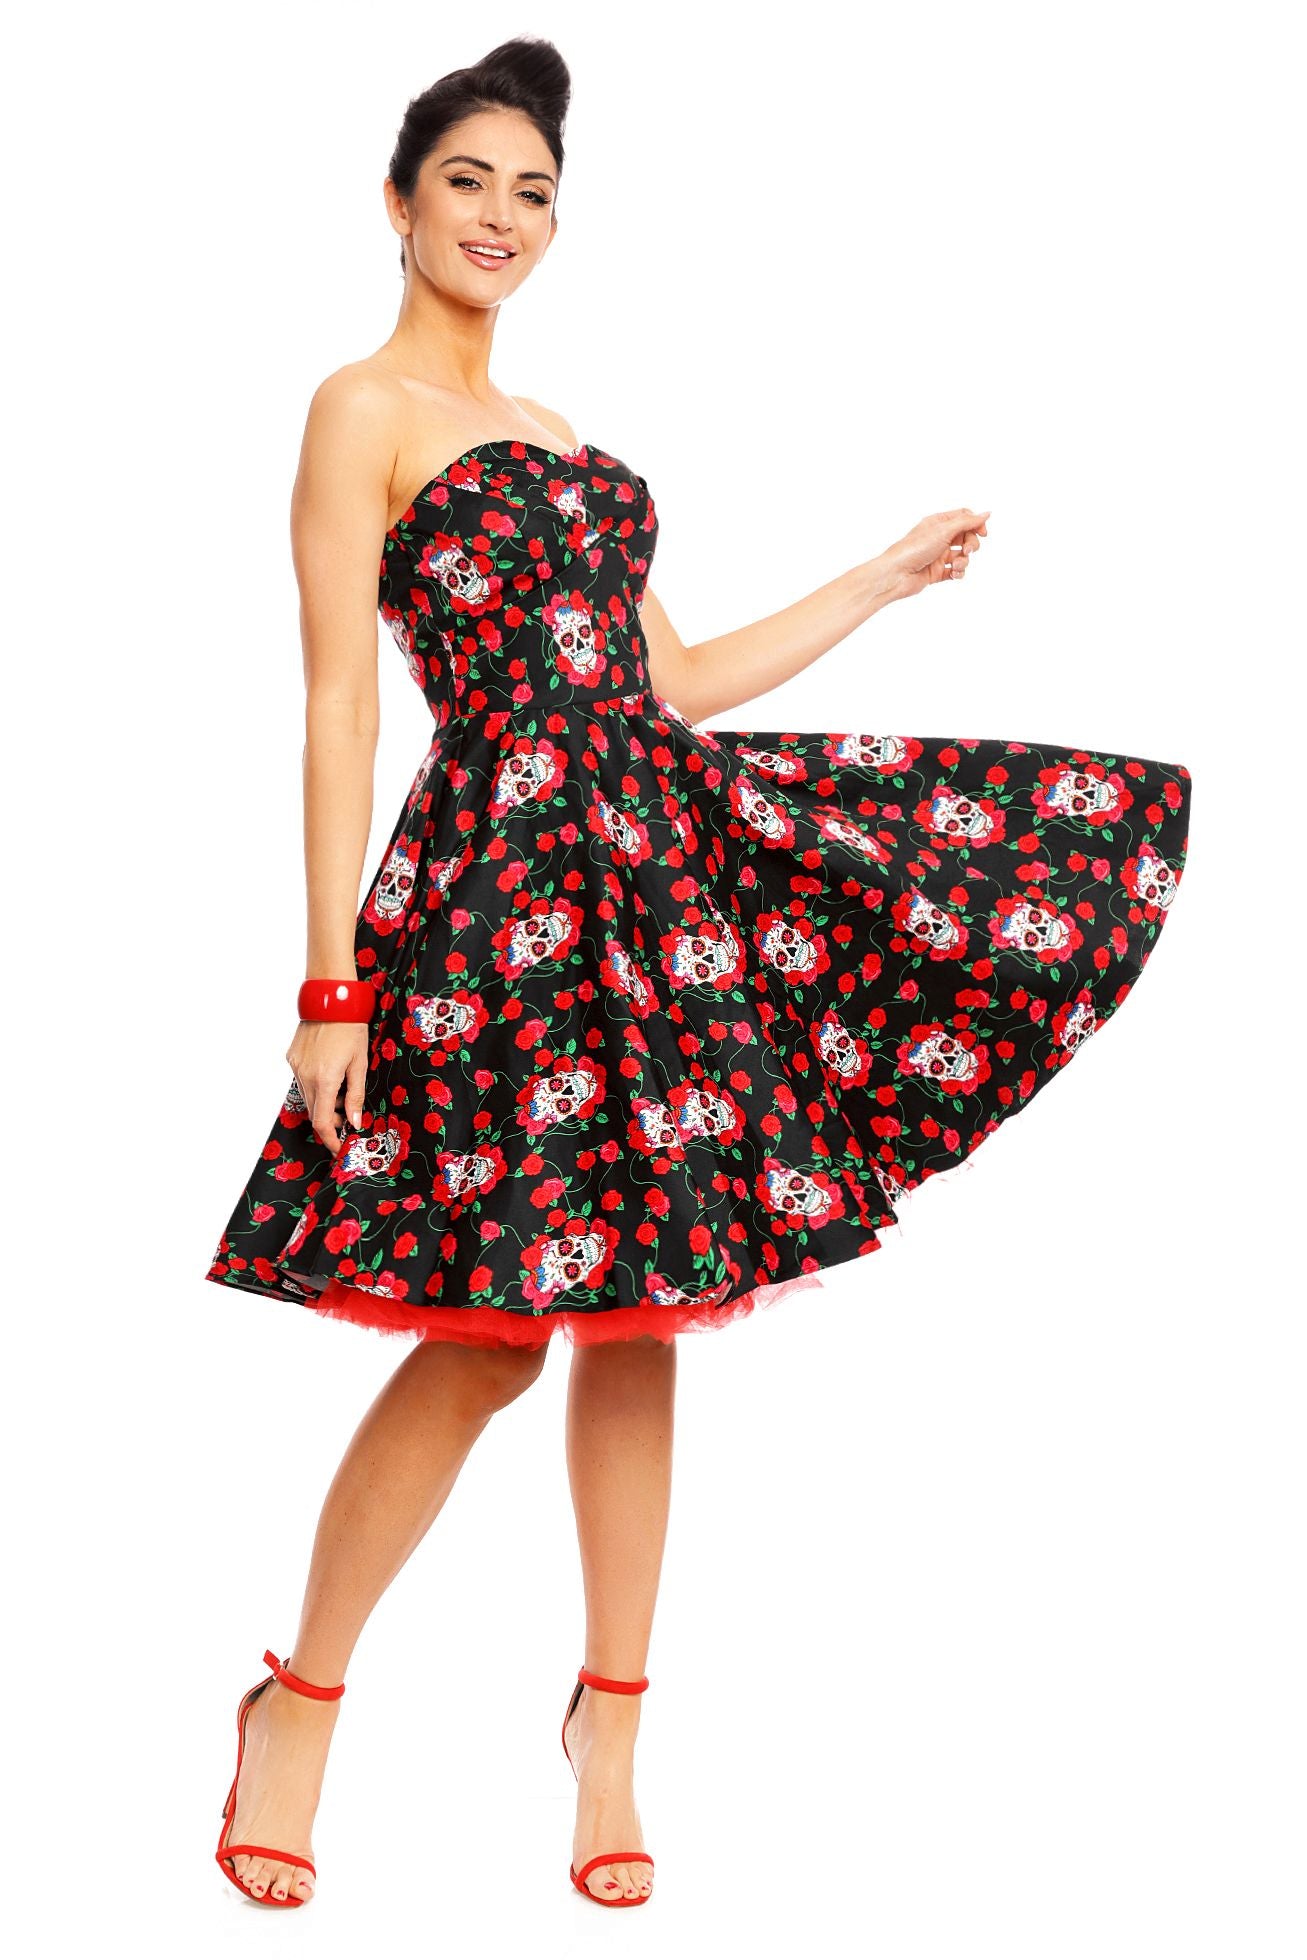 Model wearing the strapless Melissa dress, in black, with red roses and white sugar skulls, with red petticoat,  twirl view